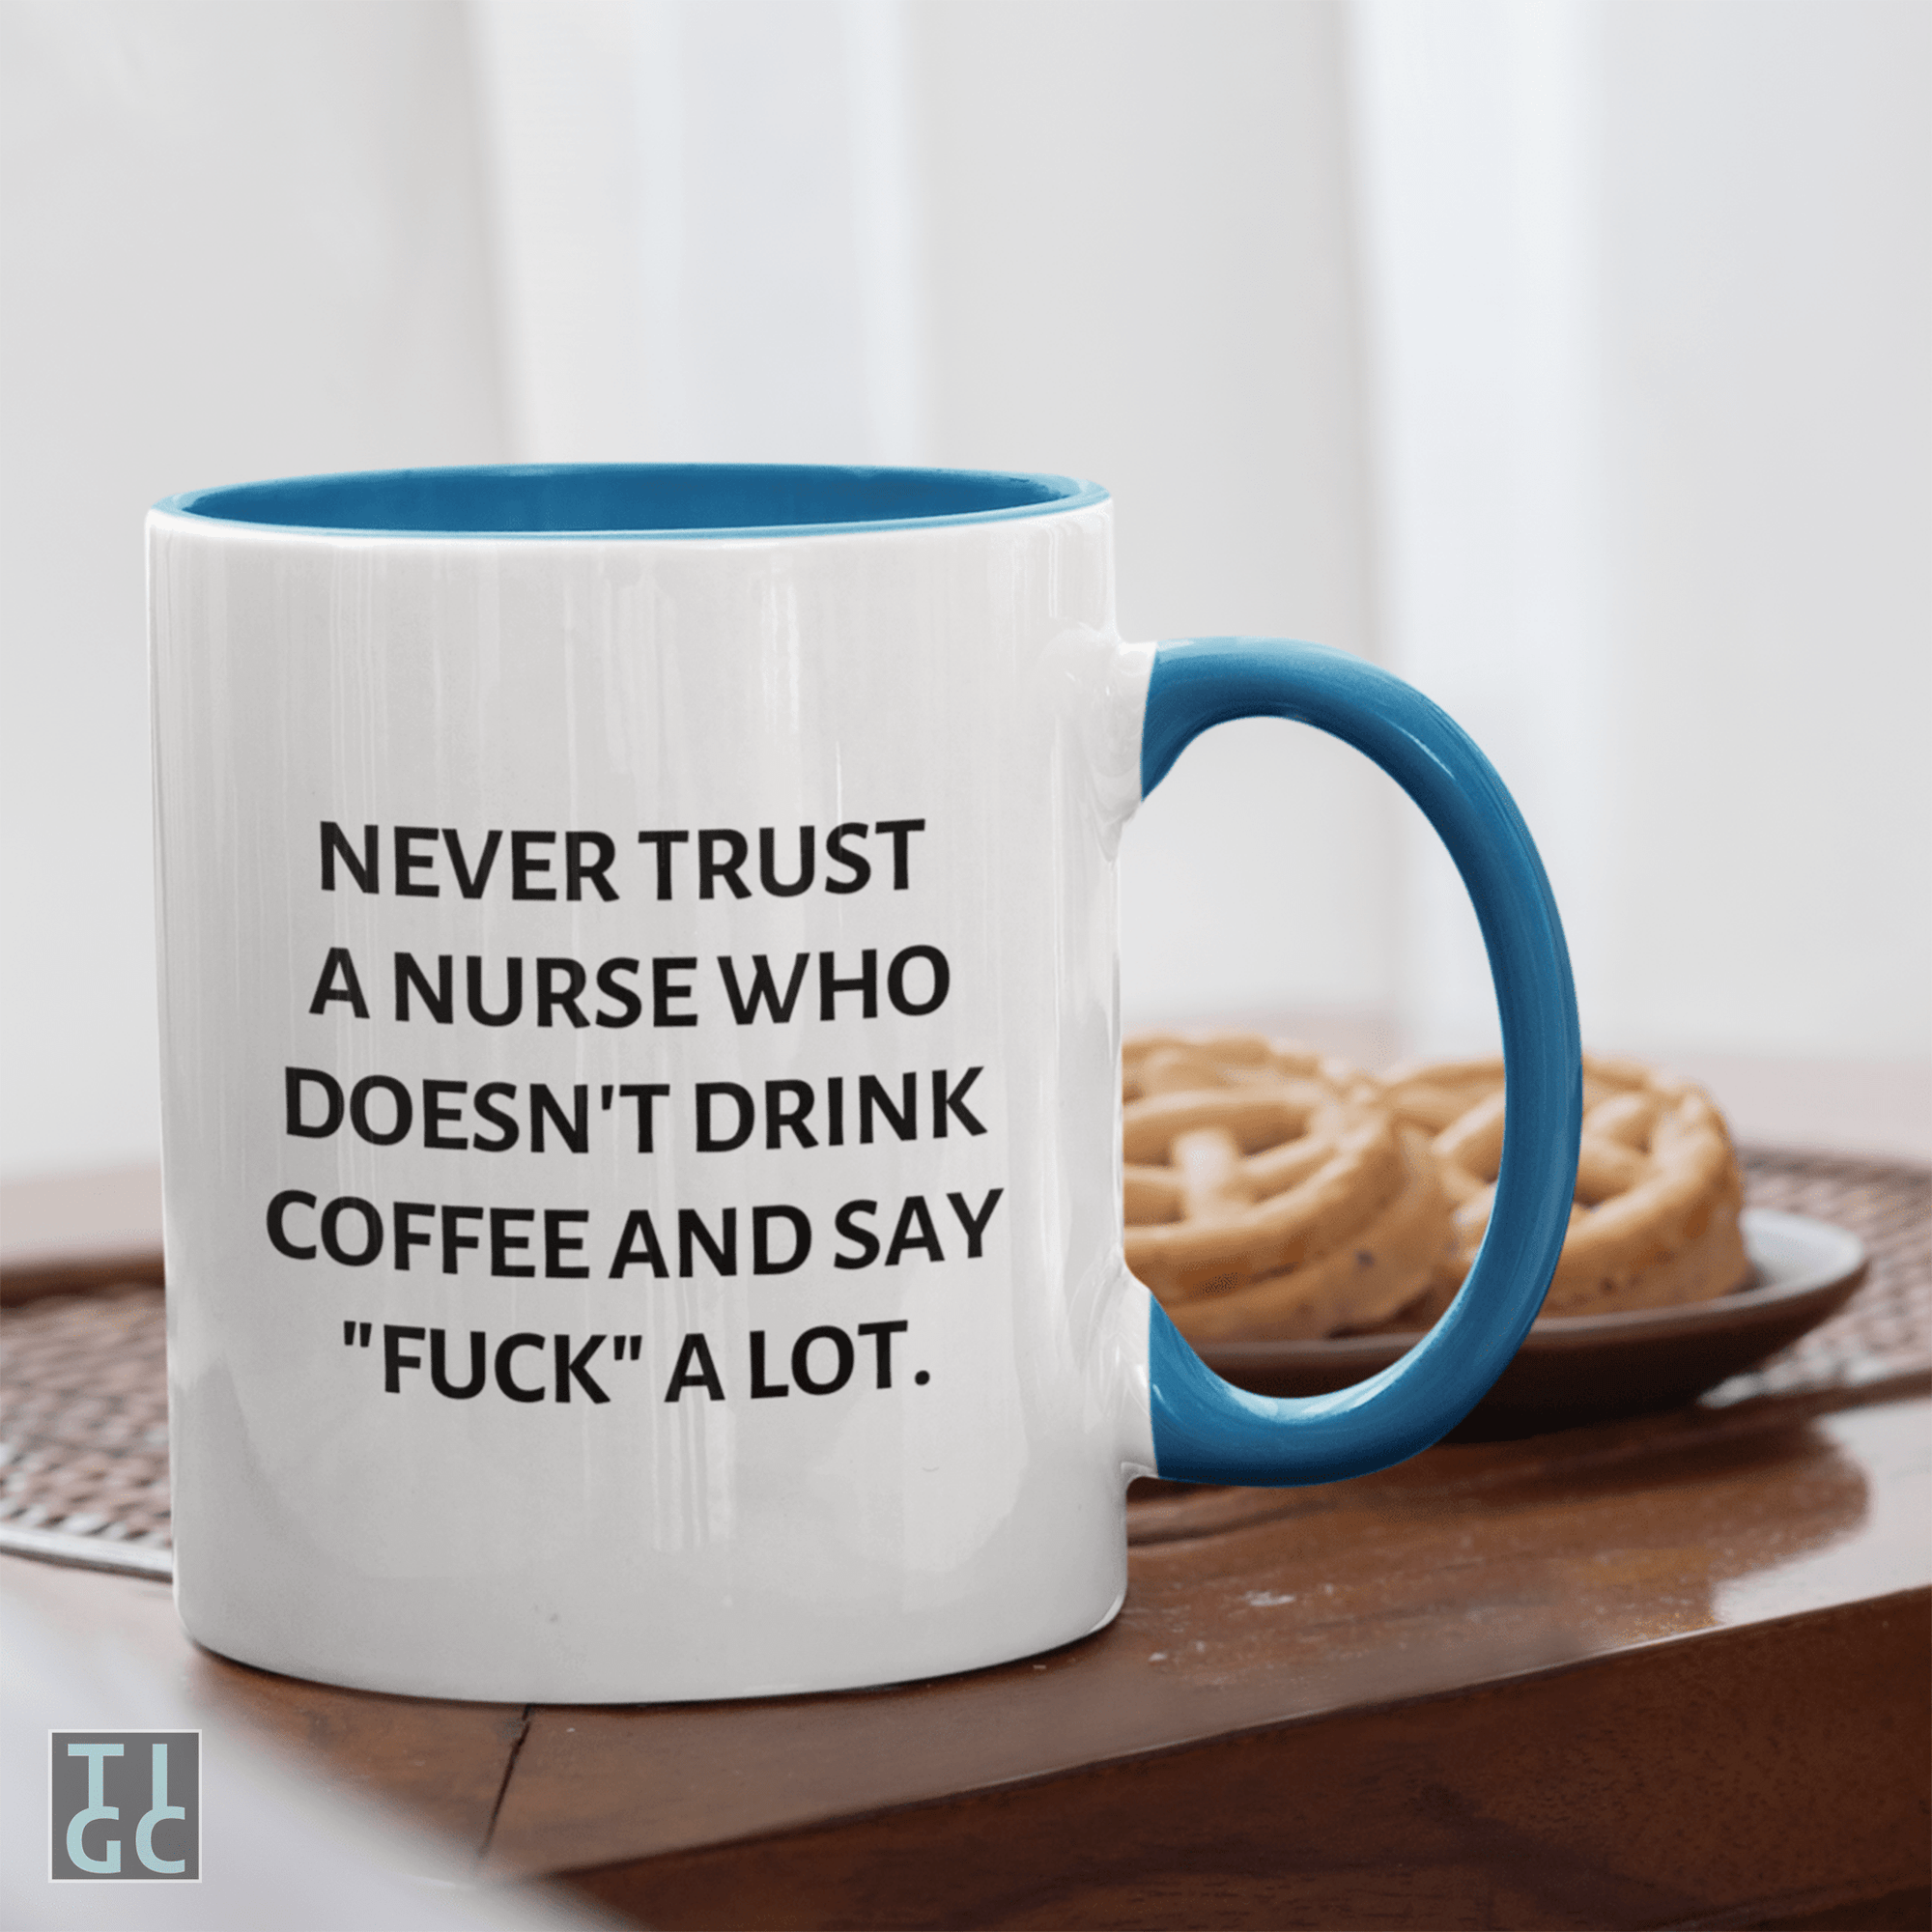 TIGC The Inappropriate Gift Co Never trust a nurse who doesn't drink coffee and say fuck a lot